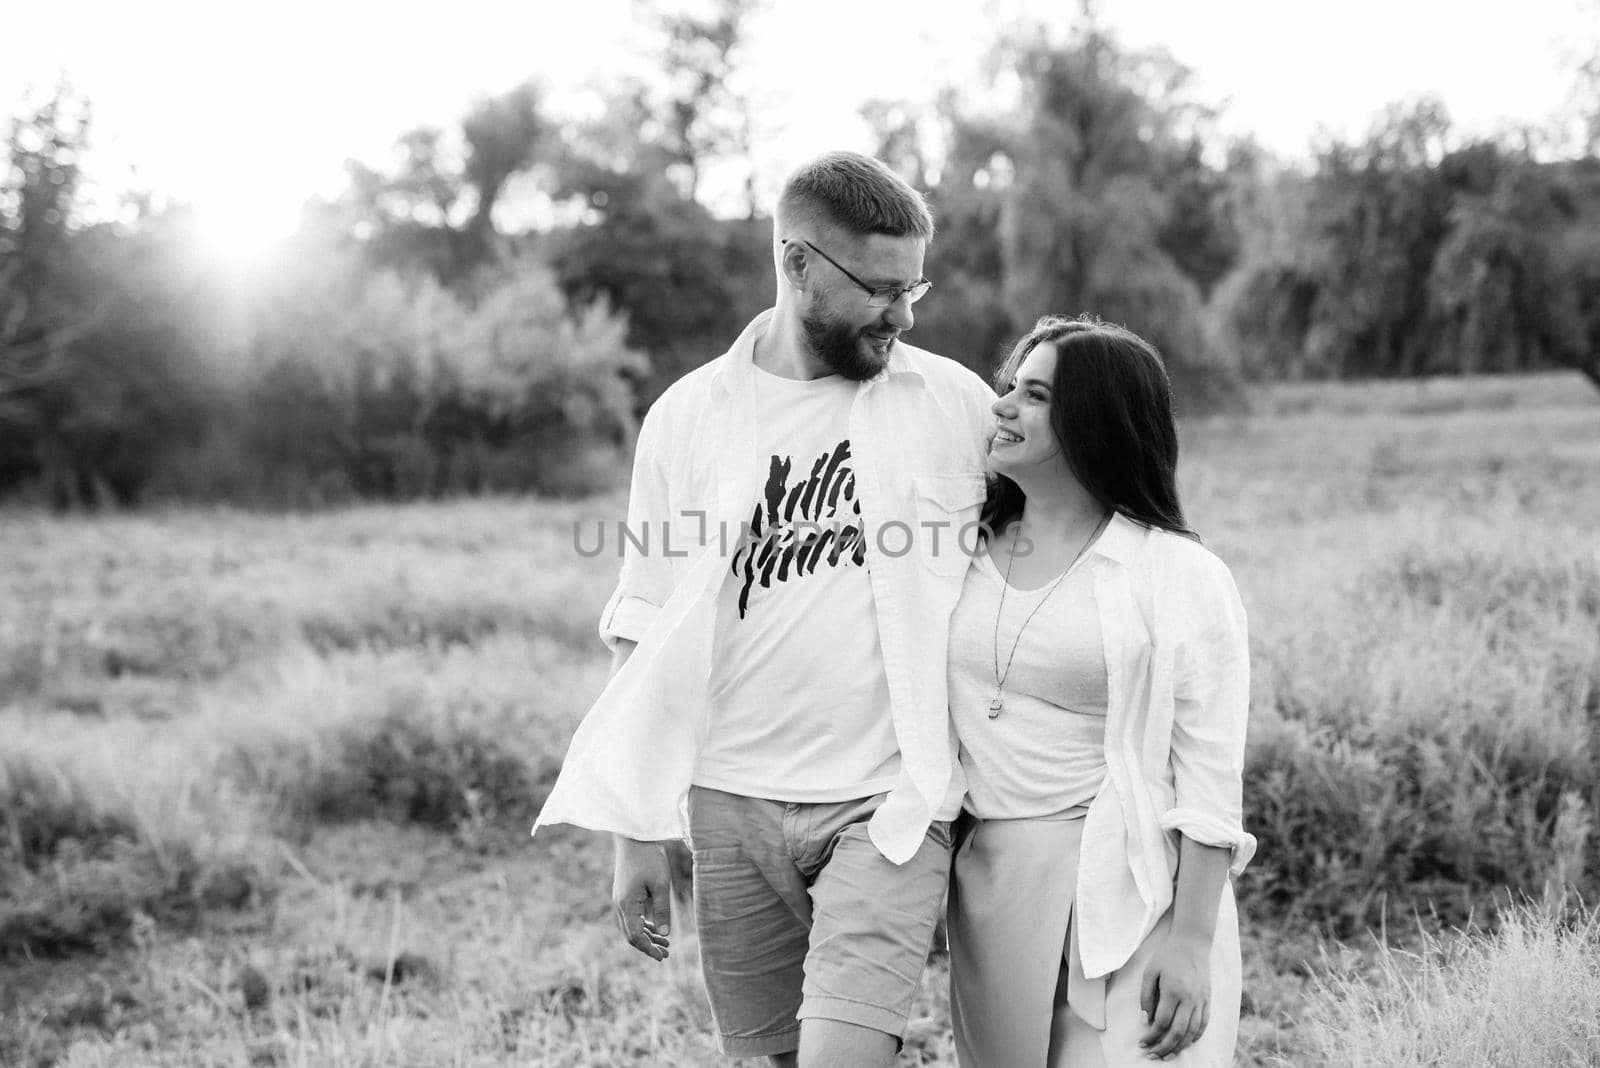 young couple in love a guy with a beard and a girl with dark hair in light clothes in the green forest